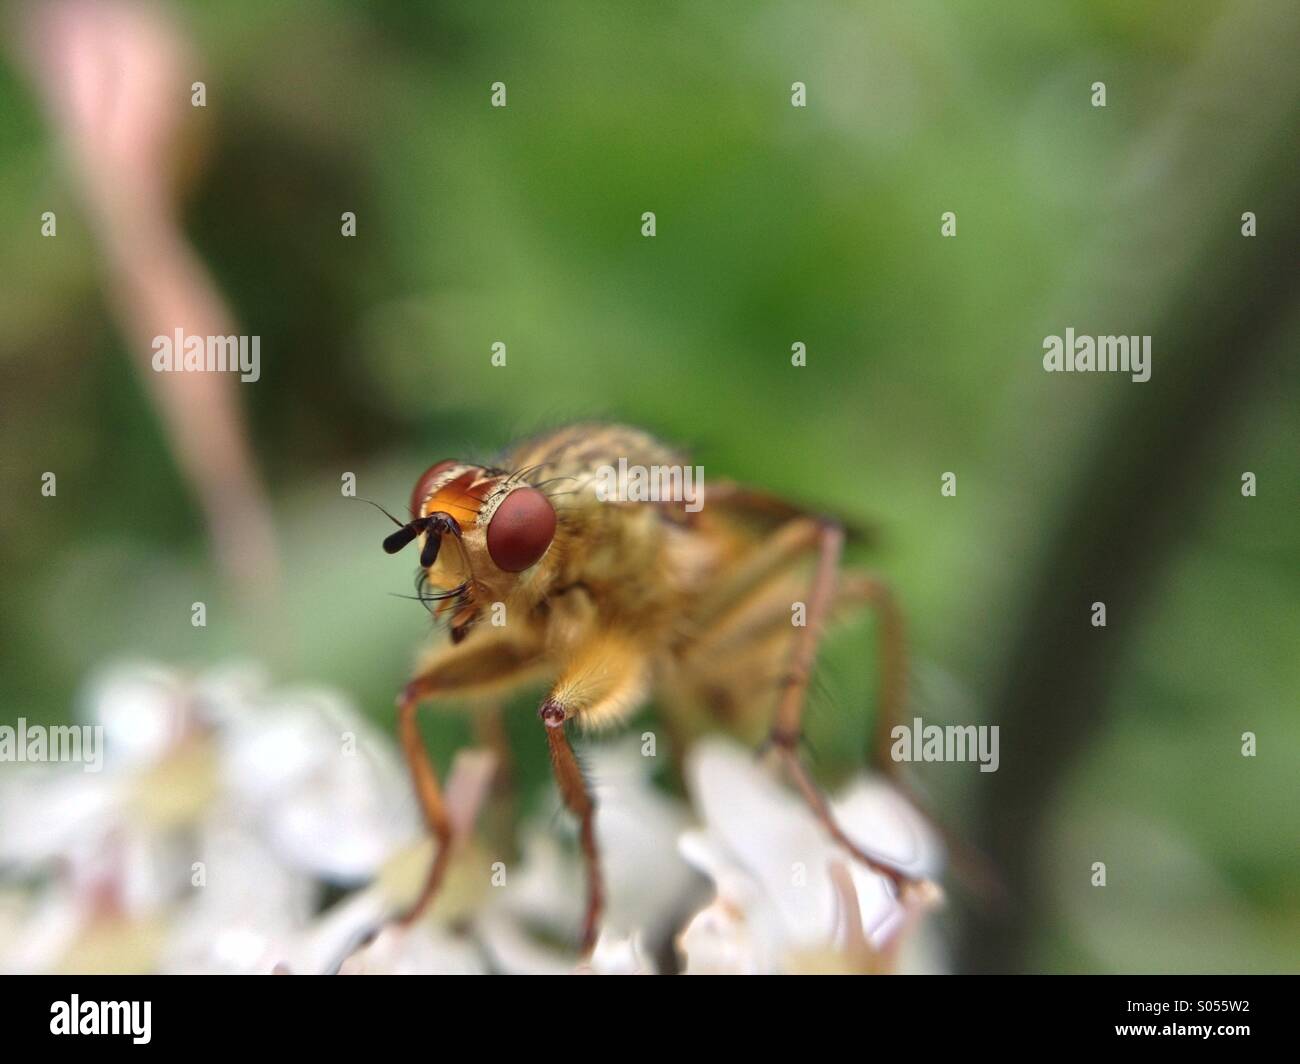 Macro view of a fly Stock Photo